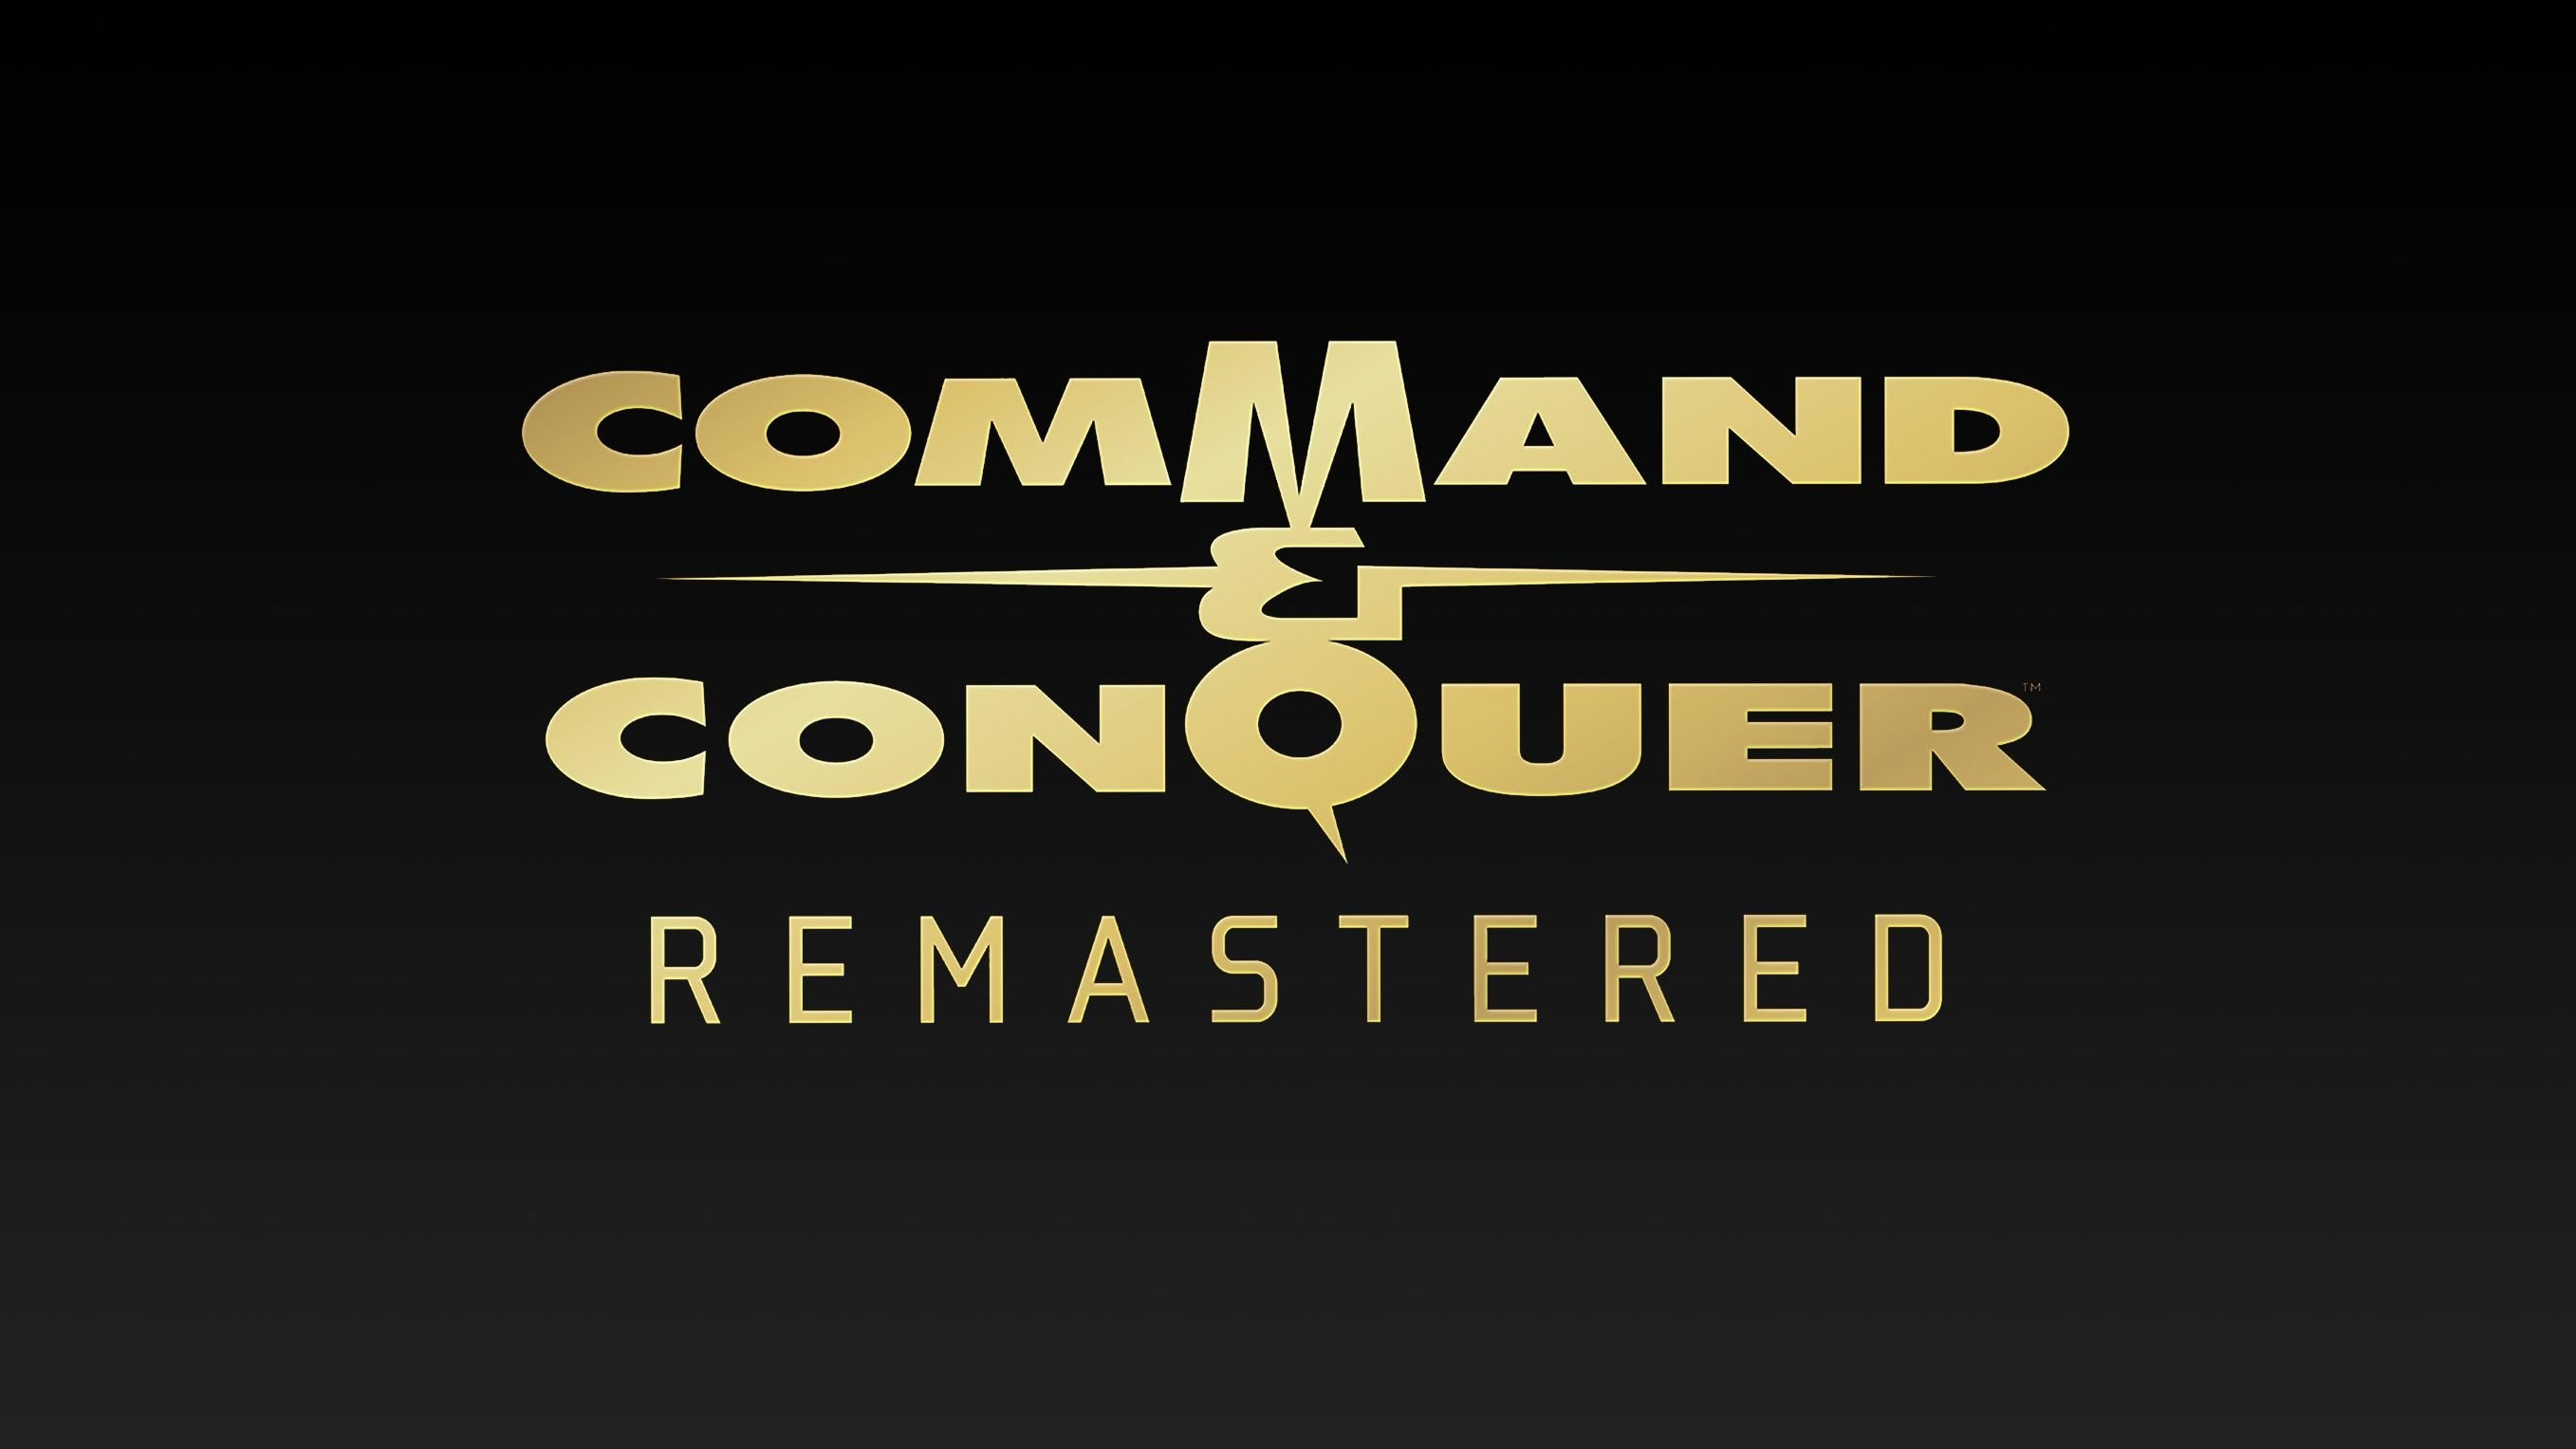 Command and conquer remastered. Command and Conquer collection. Command and Conquer лого. Command and Conquer Remastered лого.